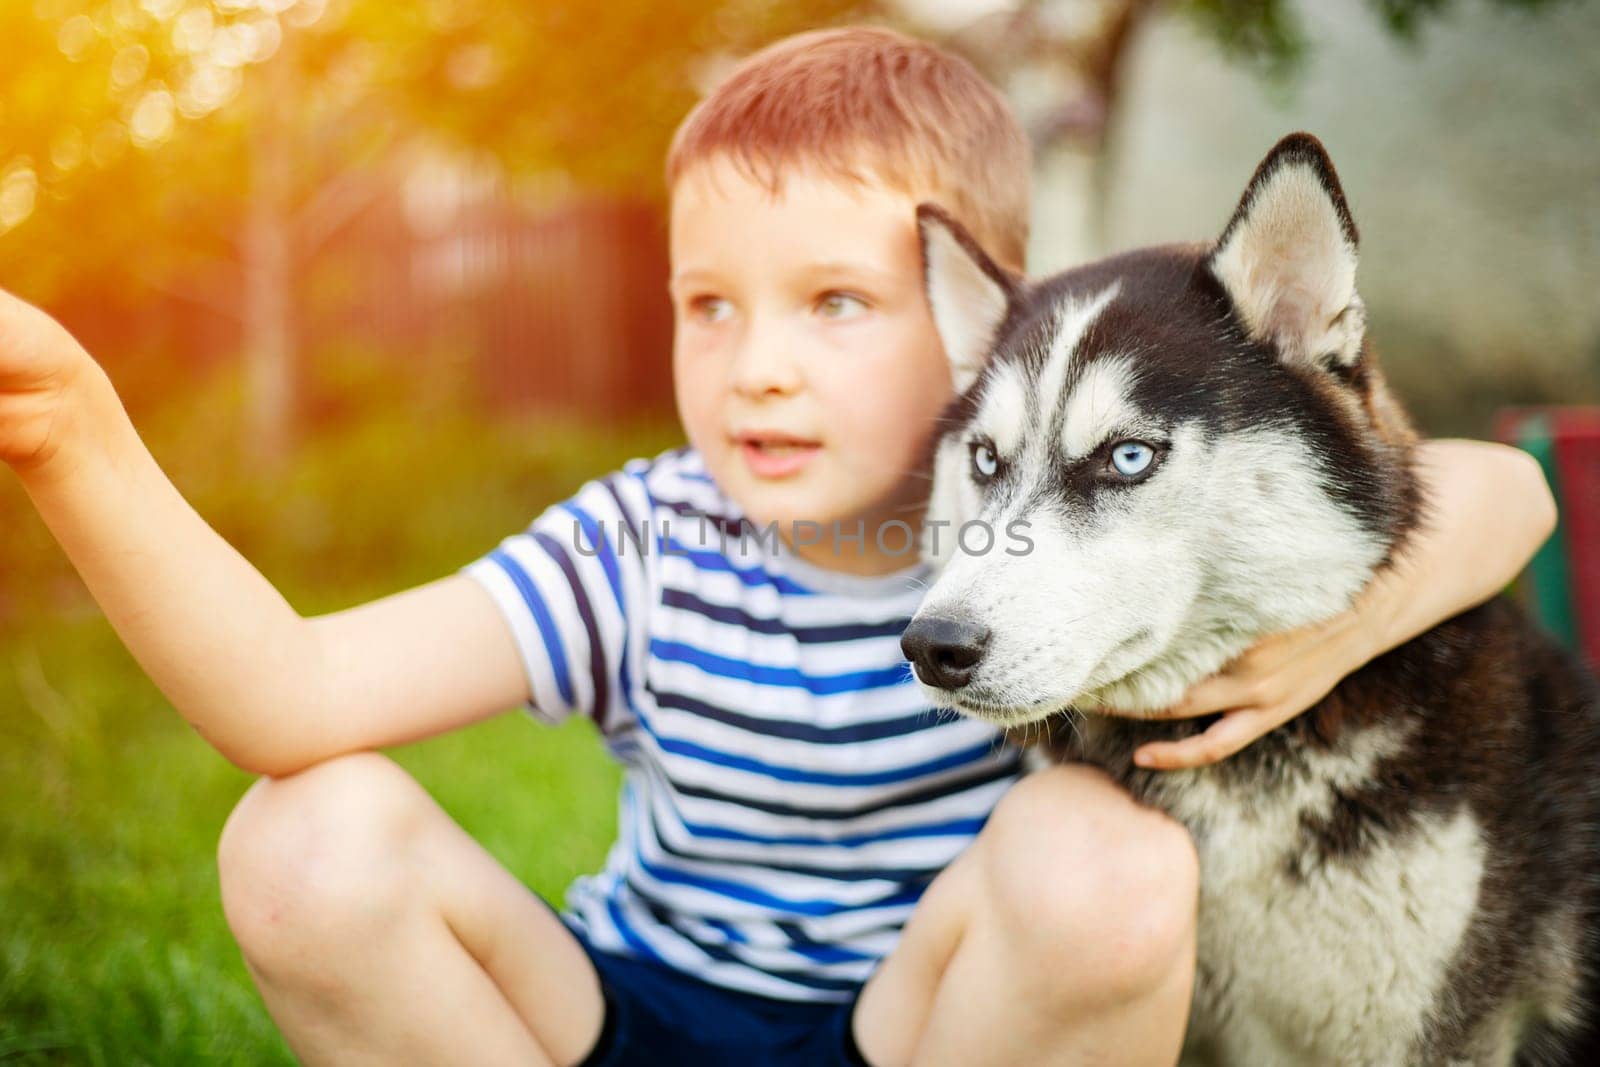 Young boy in stripes hugging Siberian Husky outdoors with golden sunlight. Friendship and pet companionship theme with natural background.